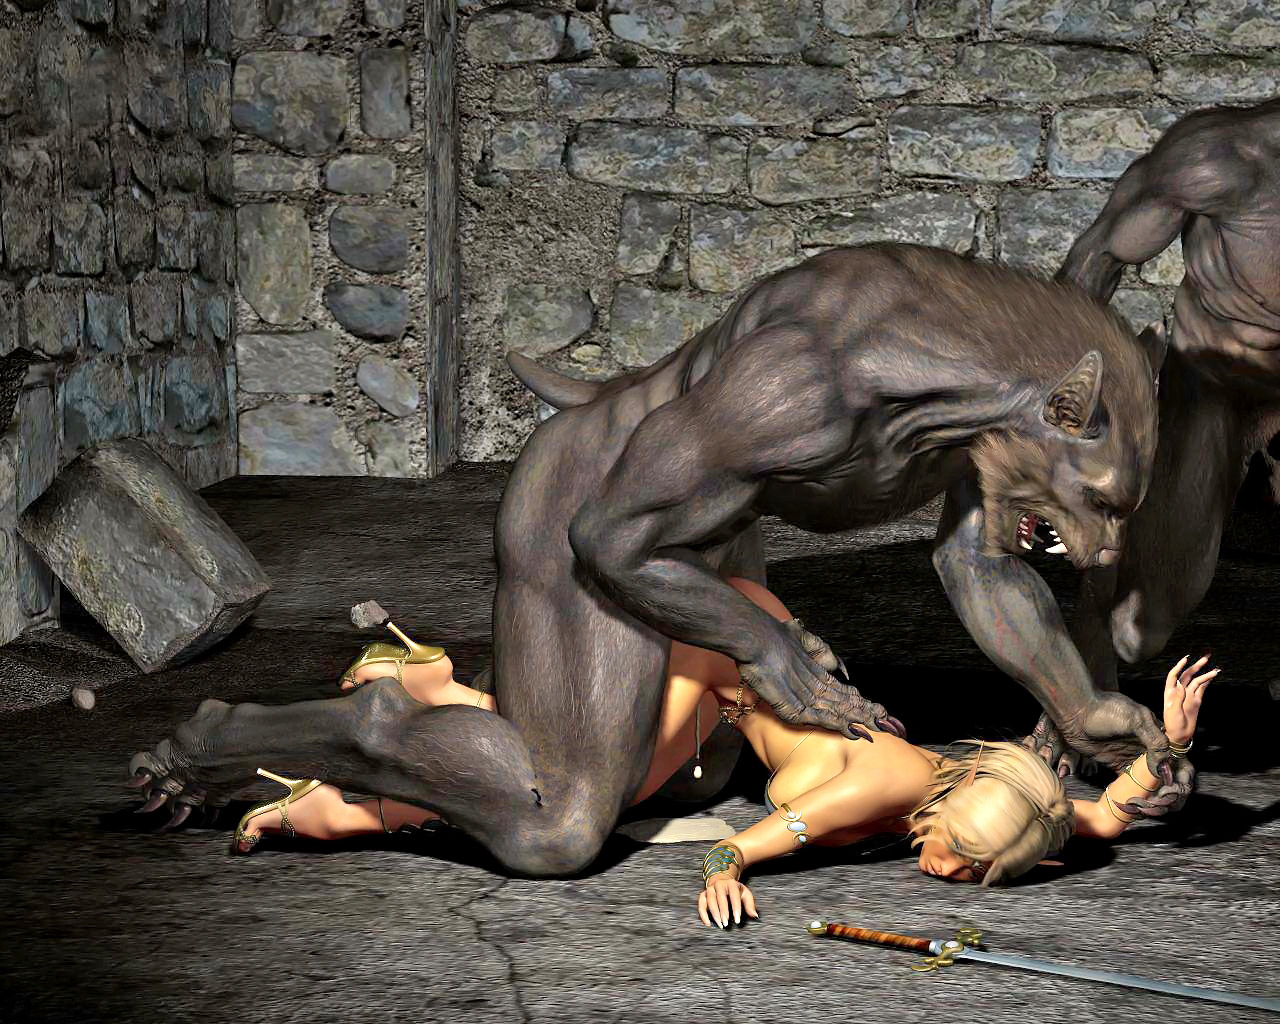 Animated Anal Sex Porn - Brutally buttfucked by werewolves â€“ 3D RPG animation anal sex at  Hd3dMonsterSex.com